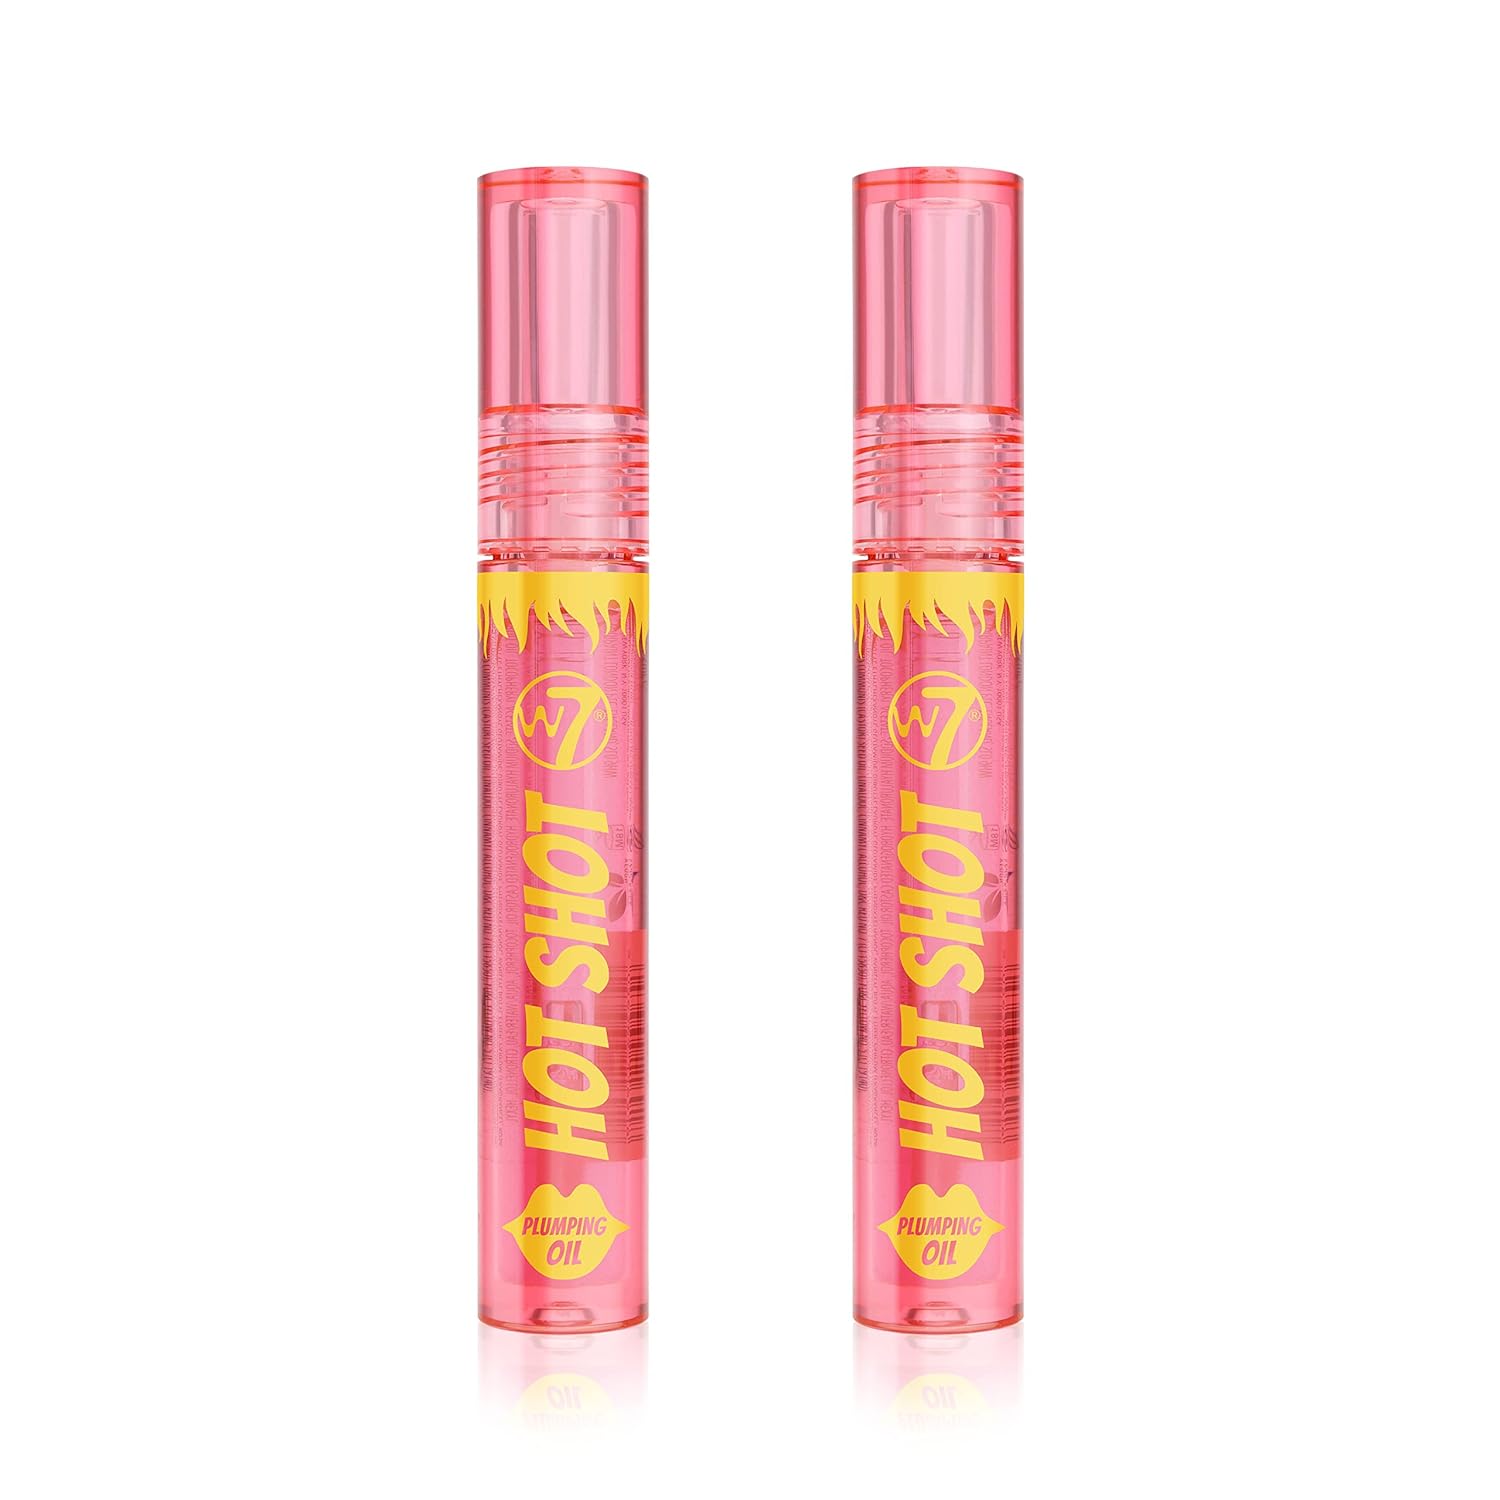 W7 Hot Shot Plumping Oil Bundle - Enhancing & Repairing Plump Effect For Fuller Lips - Clear & Soft, Natural, Everyday Lip Care - 2 Pack